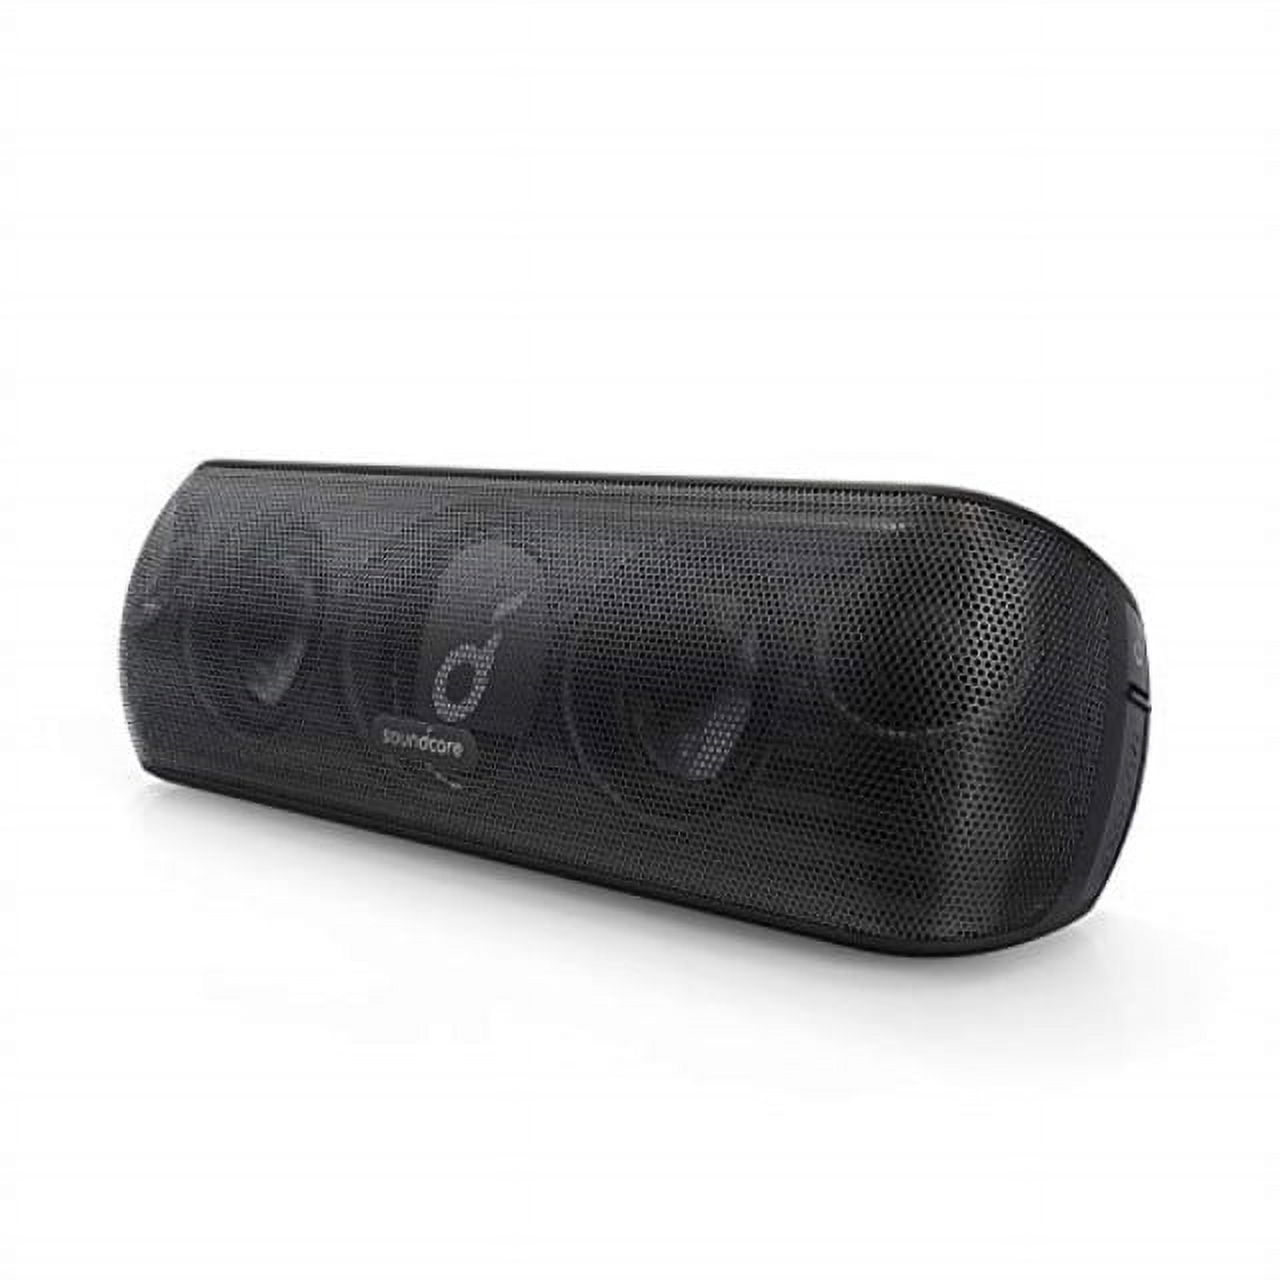 Soundcore Motion+ Wireless Bluetooth Speaker with Hi-Res 30W Audio,Waterproof, App Control (Black) - image 1 of 8